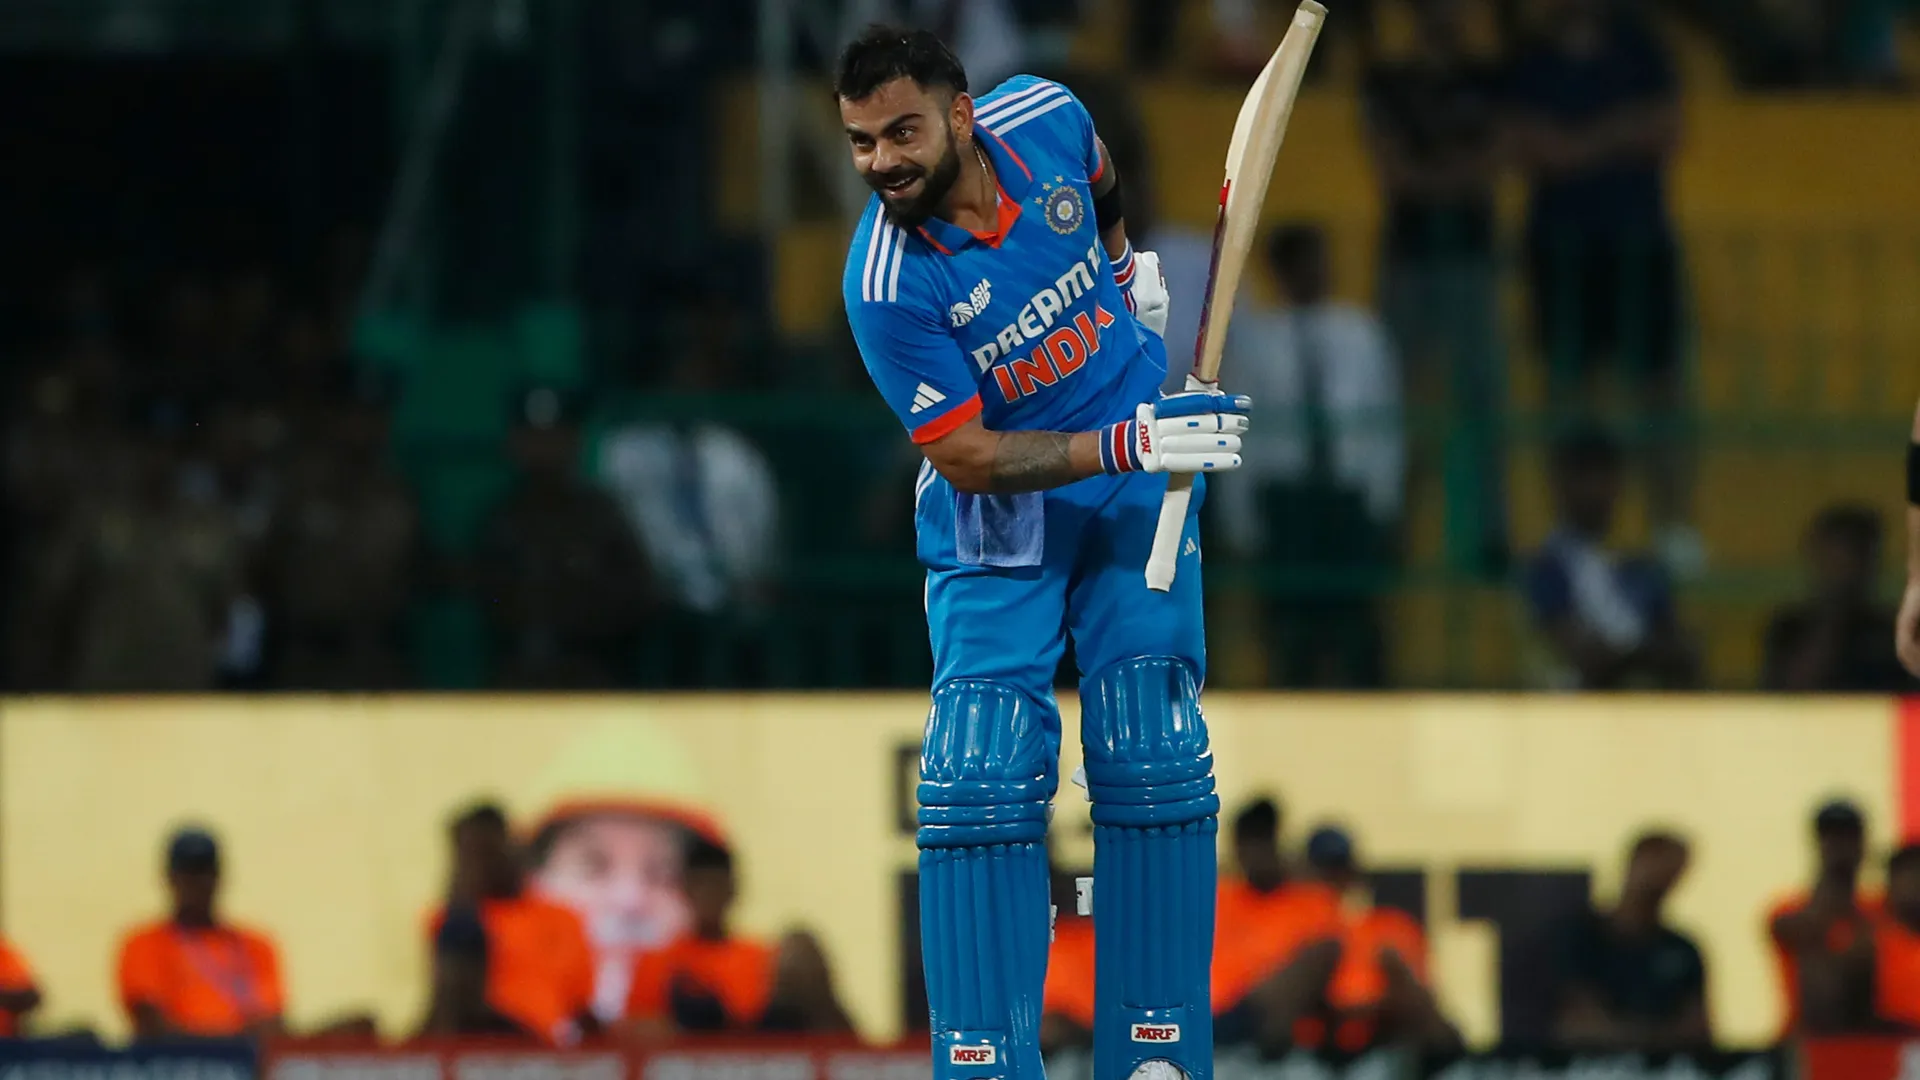 Kohli’s historic century against Pakistan is supported by five astounding statistics.